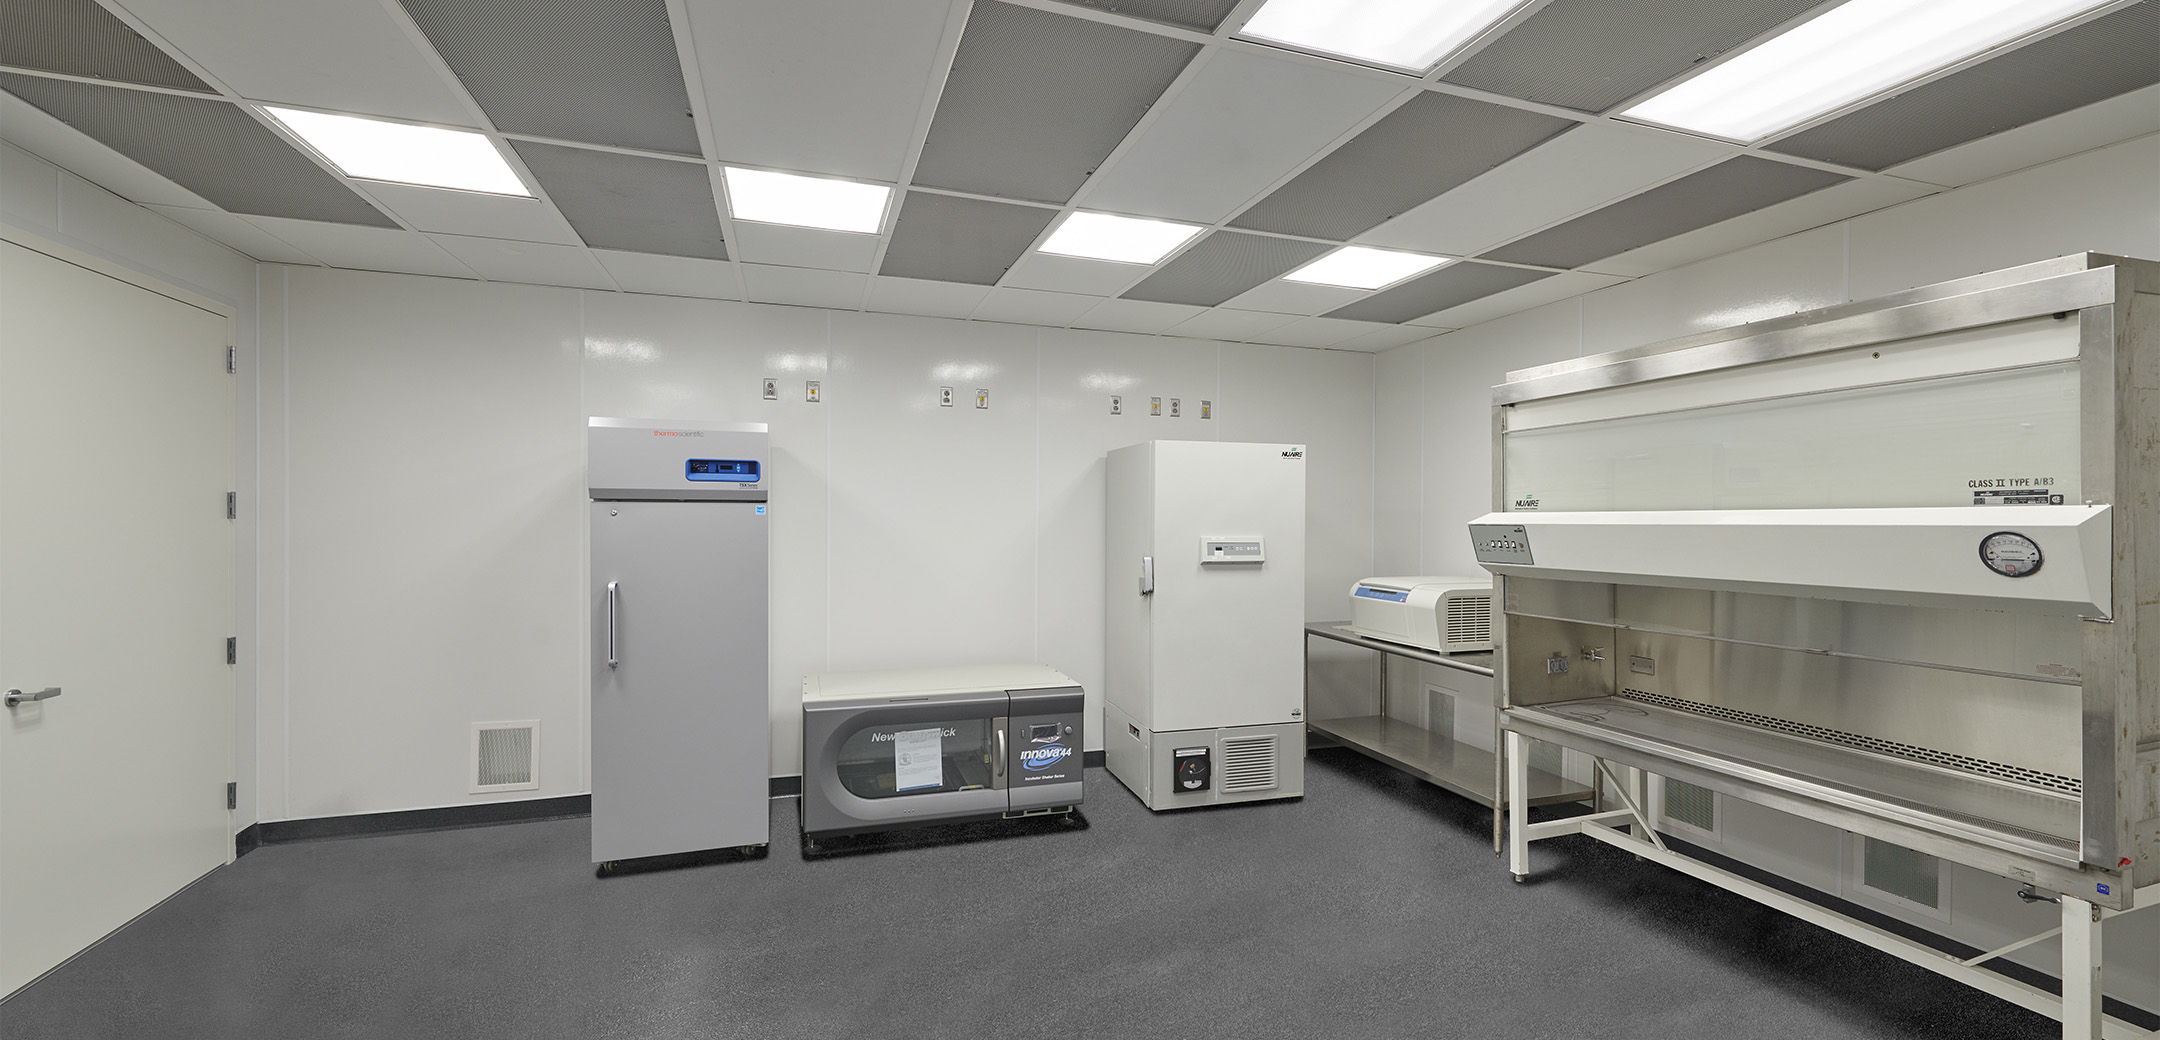 A view of the Charles River Clean Room with panel lighting, gray flooring and white walls, showcasing the test sample fridges and storage units as well as a fume chamber along the wall.